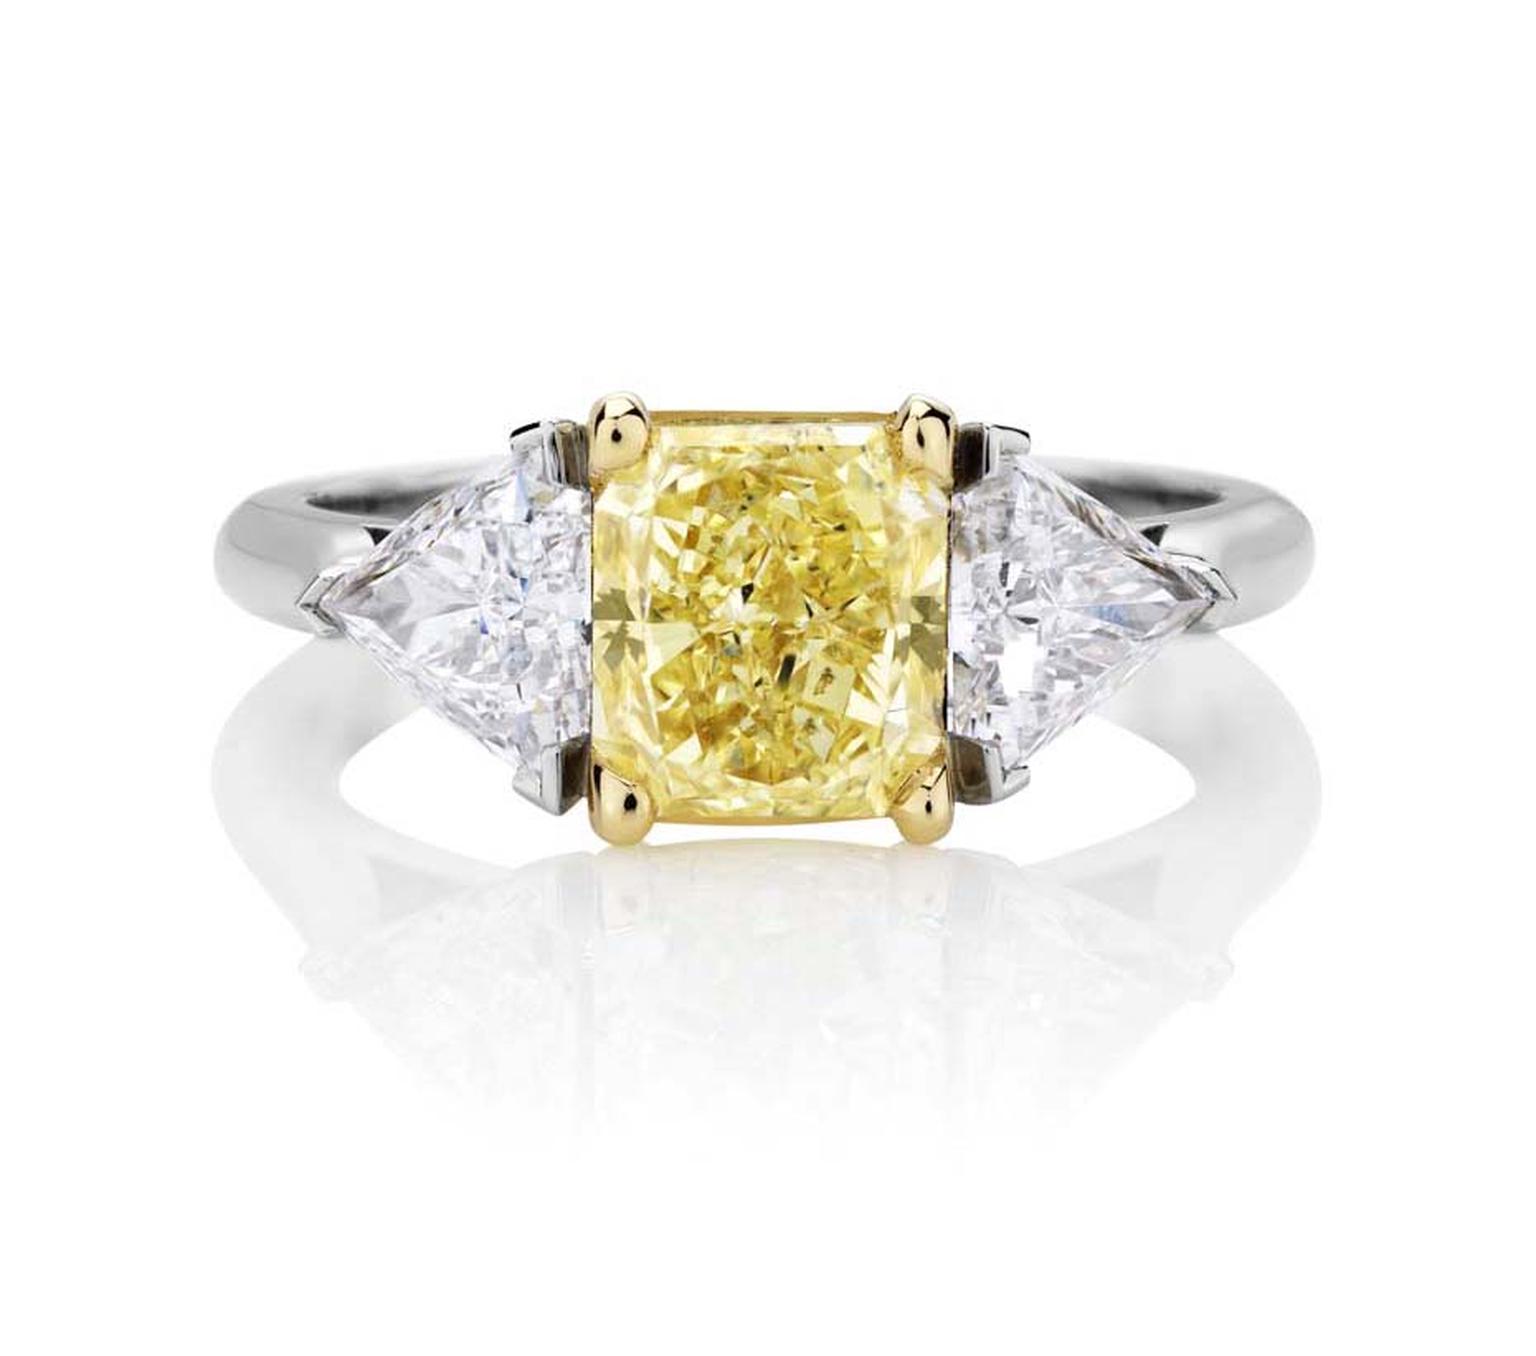 Part of De Beers jewellery’s 1888 Master Diamonds collection, this one-of-a-kind three stone engagement ring is set with a 3.93ct Vivid yellow diamond flanked by trilliant-cut diamonds.